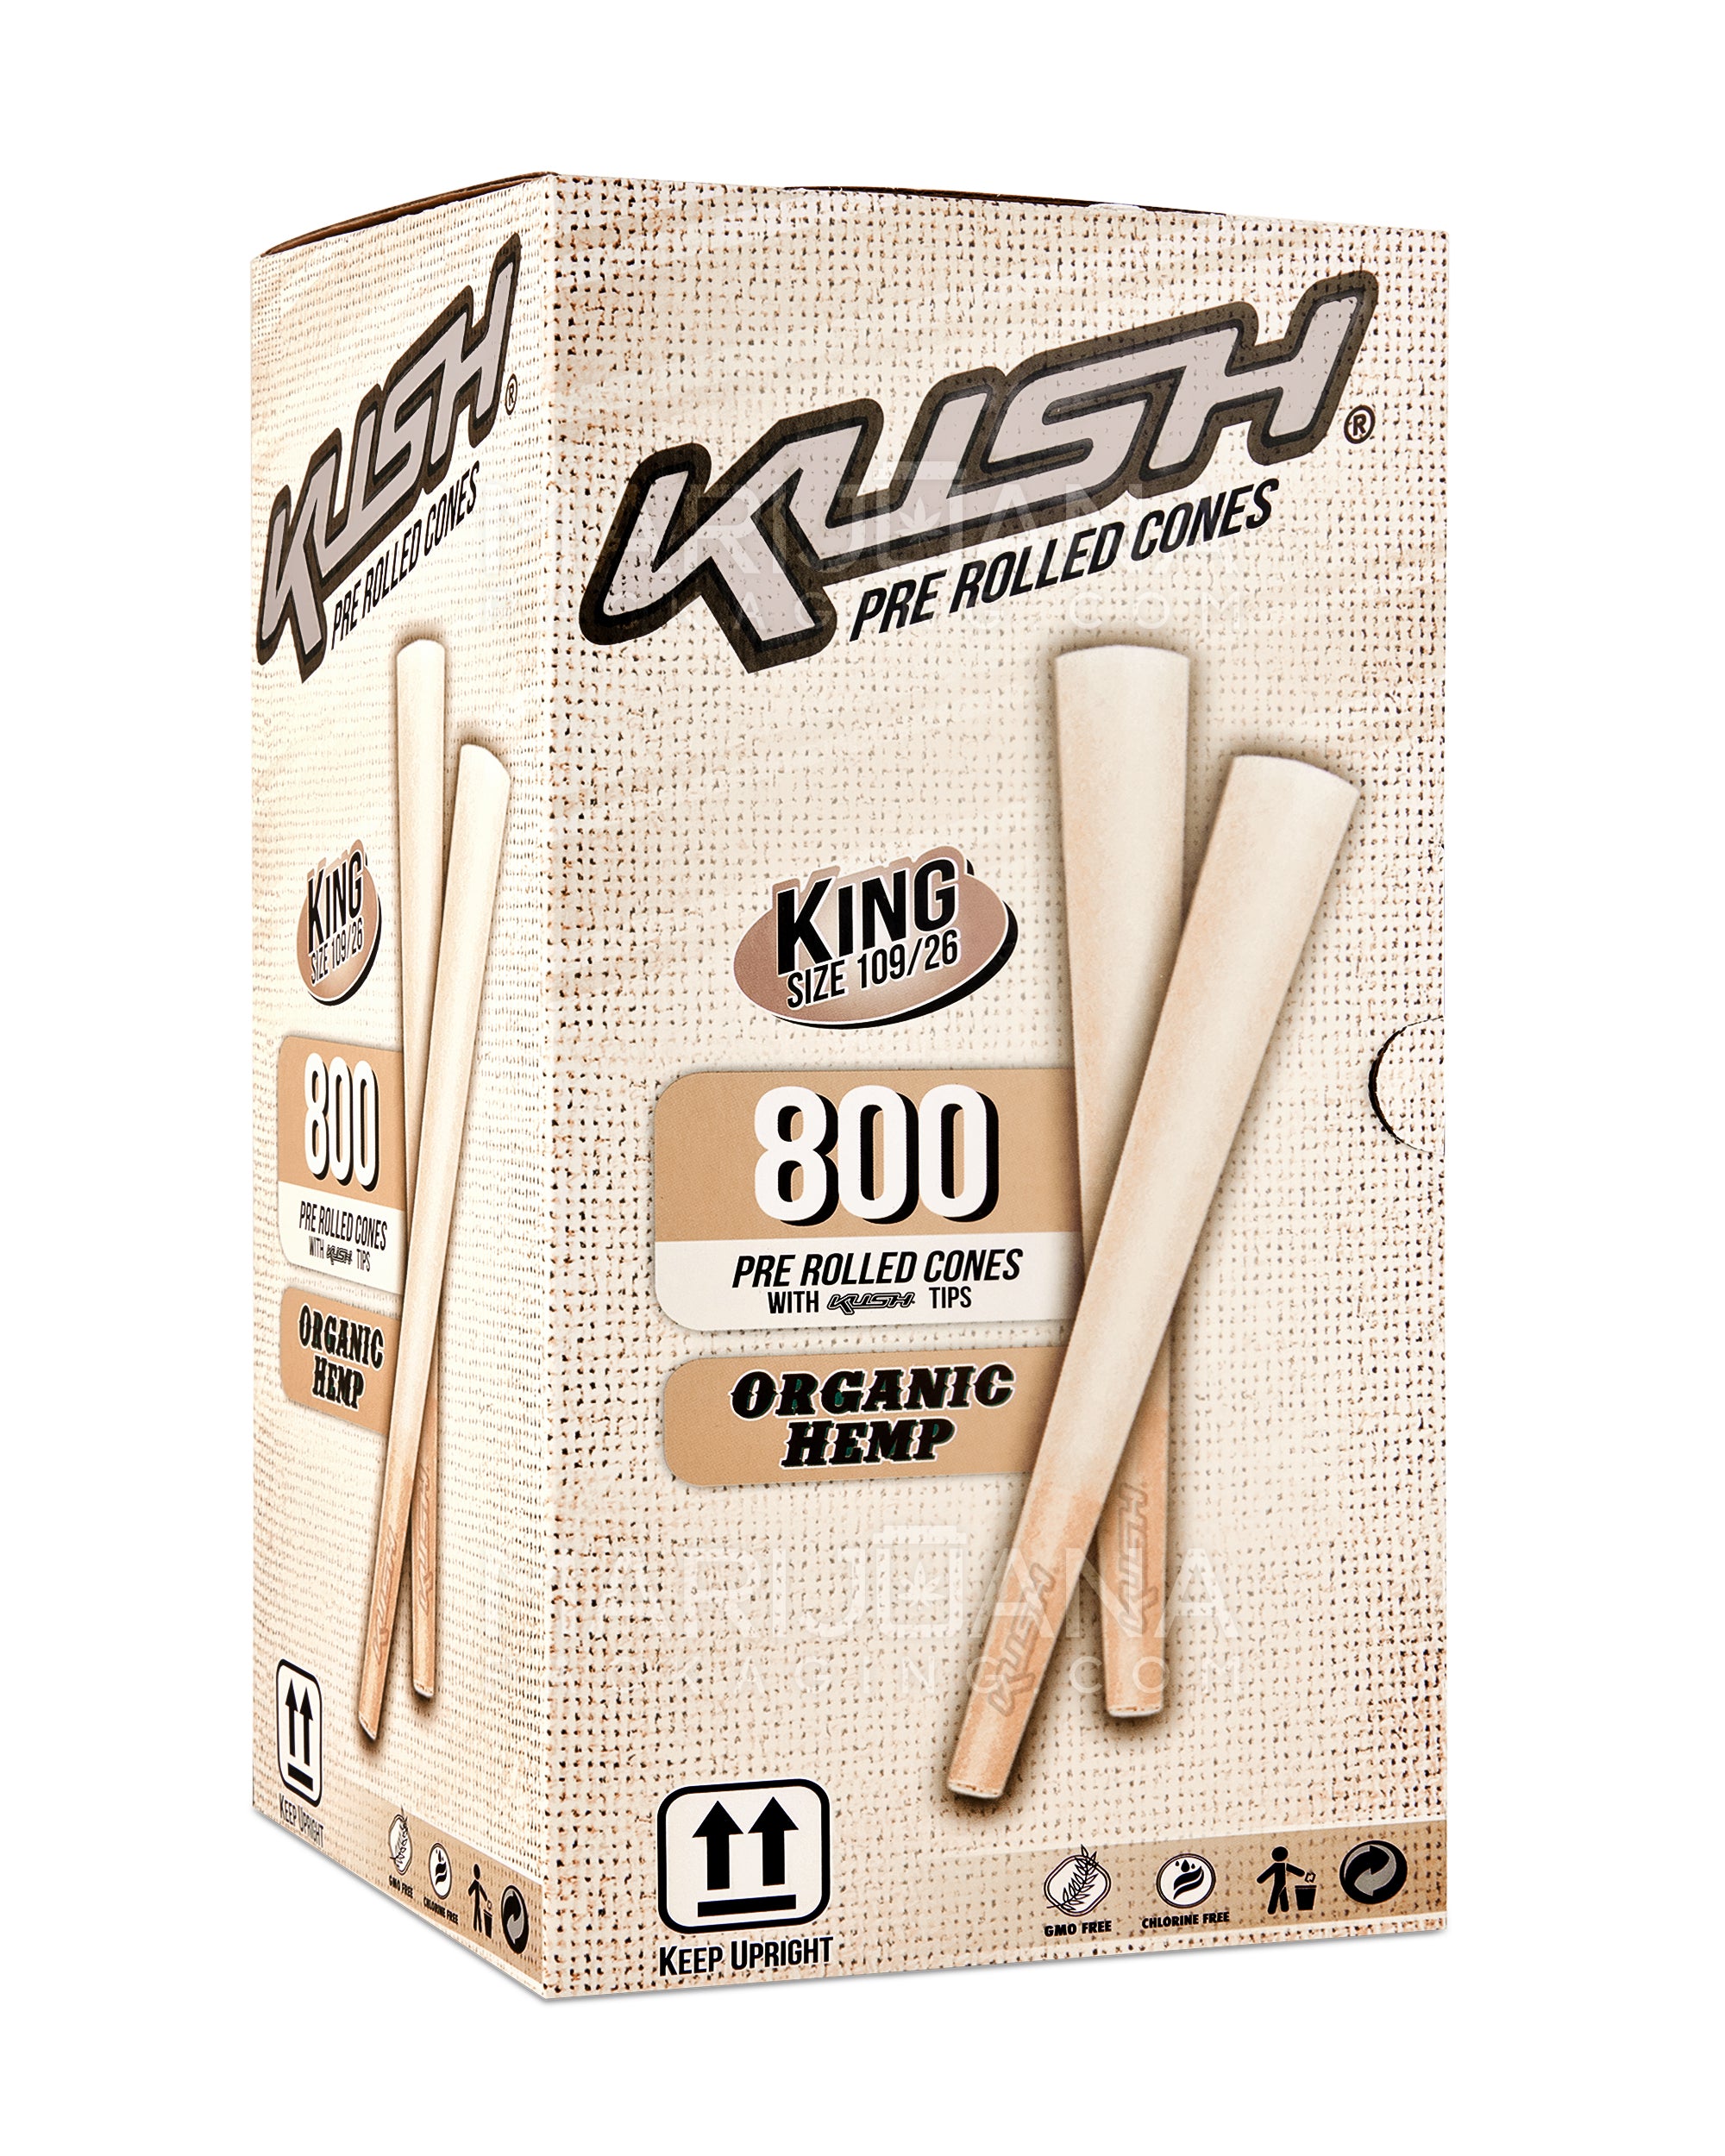 KUSH | Organic King Size Pre-Rolled Cones w/ Filter Tip | 109mm - Organic Hemp Paper - 800 Count